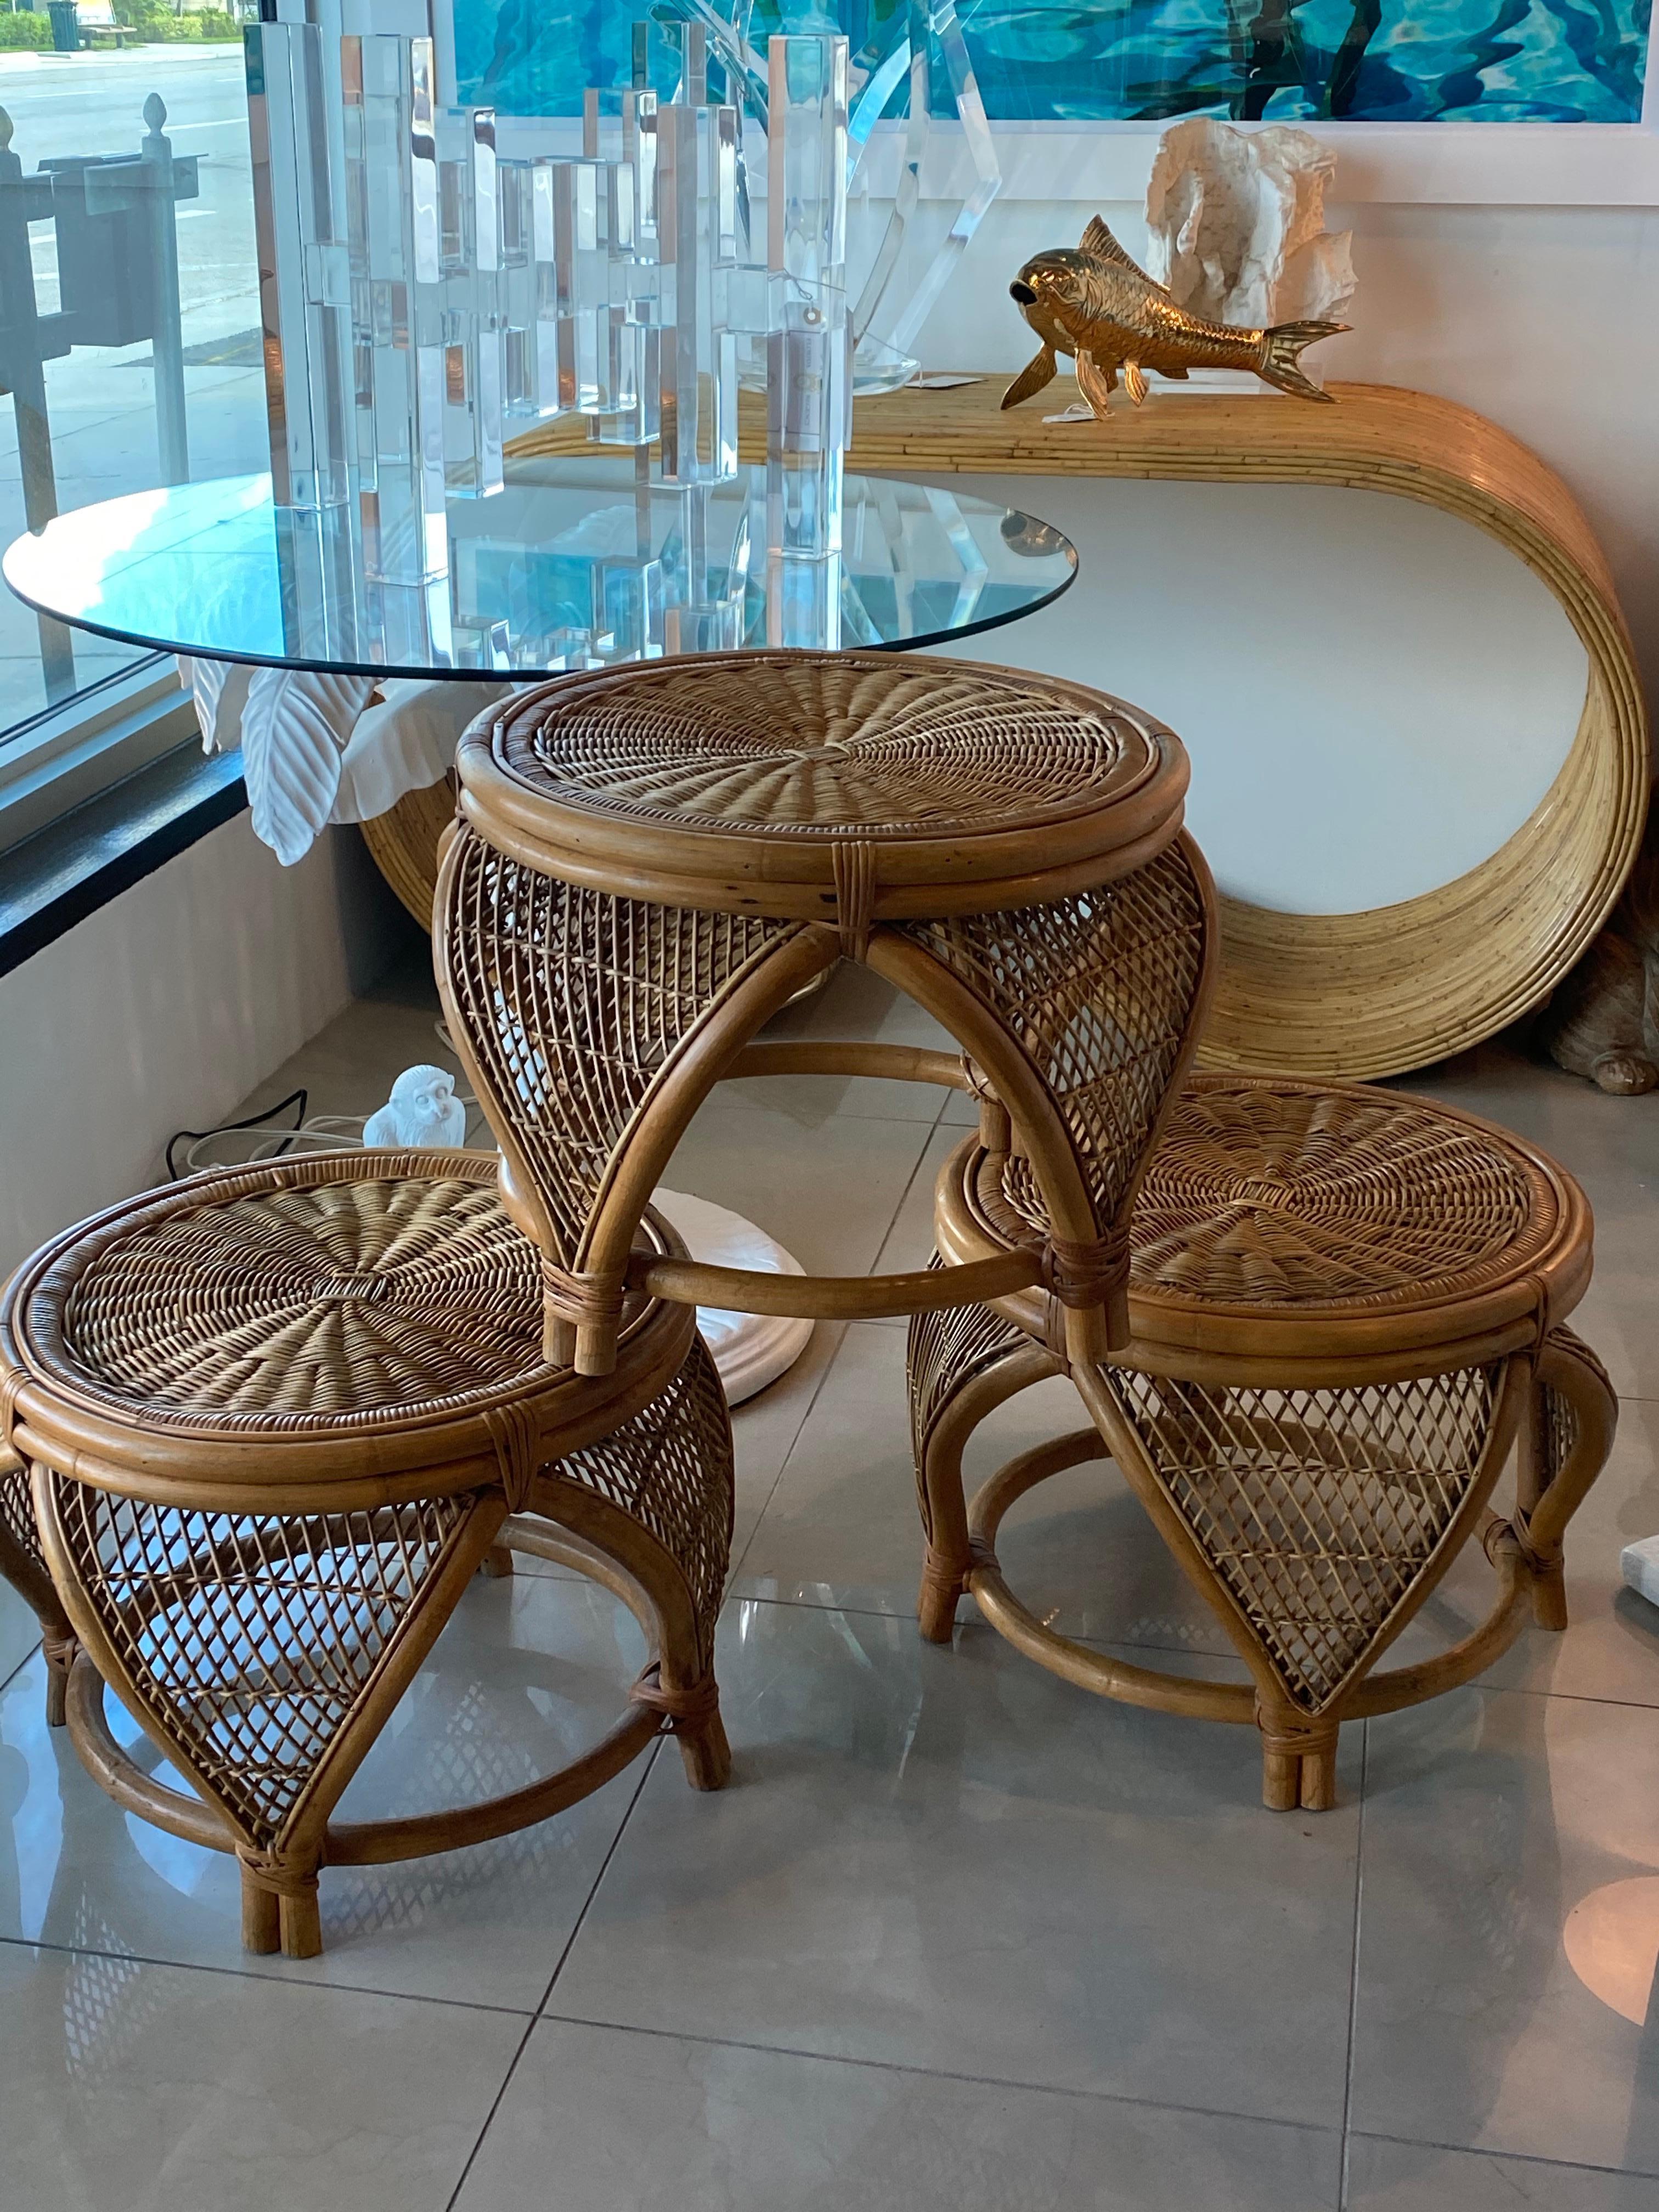 Vintage set of 3 rattan and wicker ottomans, footstools, tables, benches, stools. These could be used in a variety of ways. Beautiful tropical vibe with a Moroccan feel with the flare, arched sides. No damaged or broken wicker. You can add an